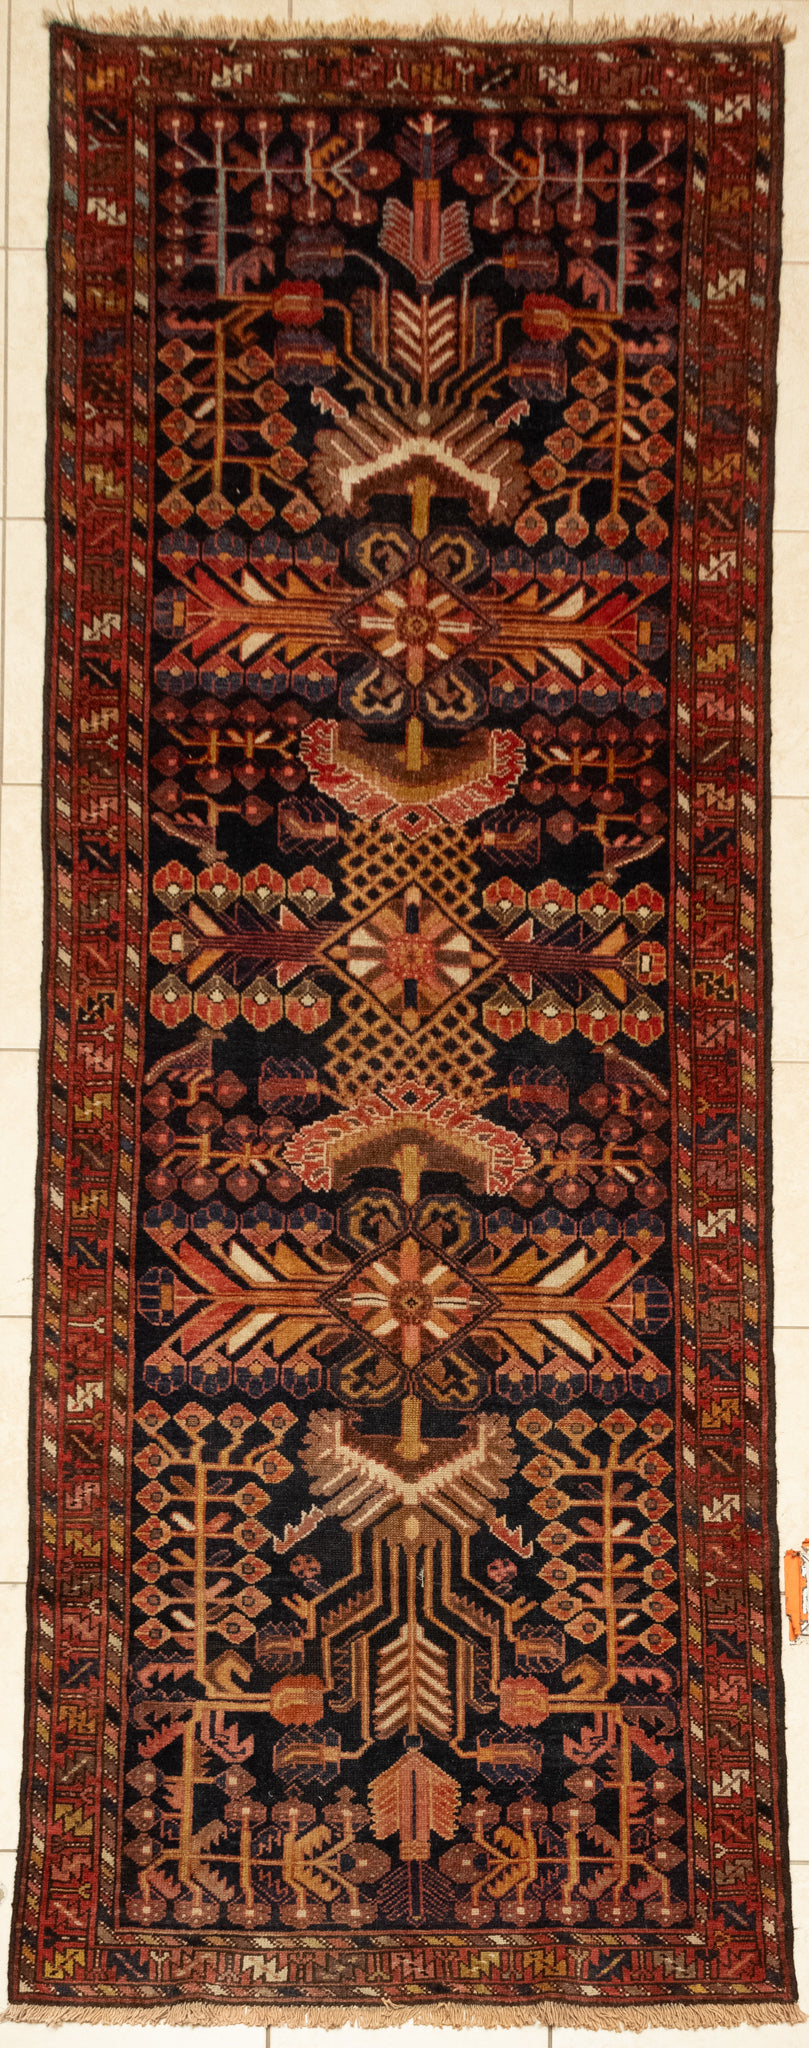 Wool Hand-Knotted Malayer Rug 11' x 4'2"